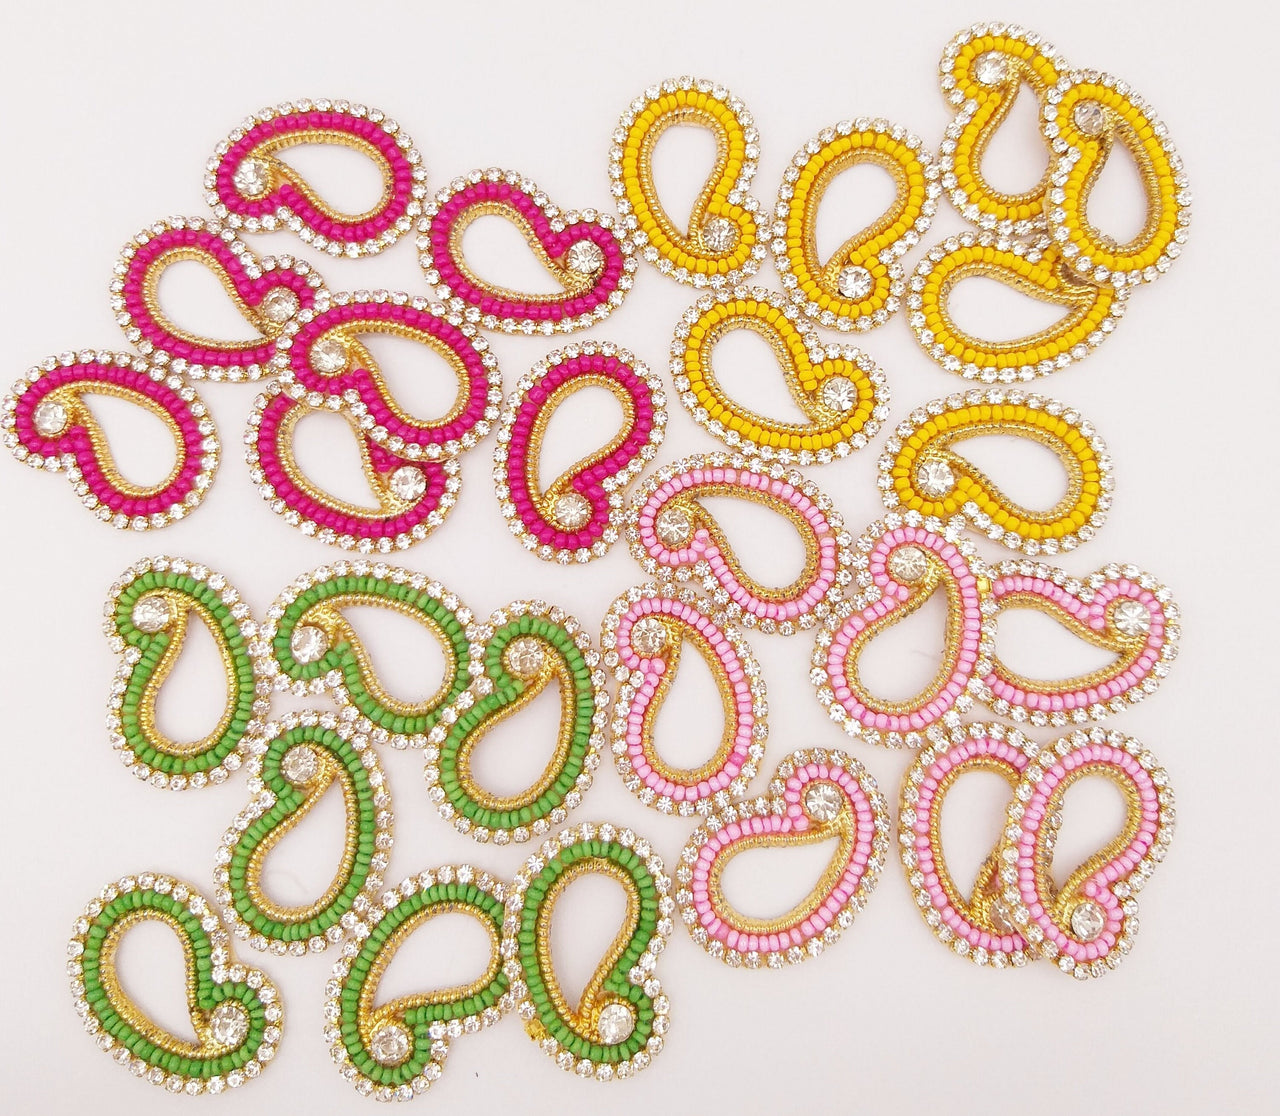 5 Paisley Appliques In Yellow Seed Beads and Rhinestones, Gold Paisley Appliques, Beaded Applique